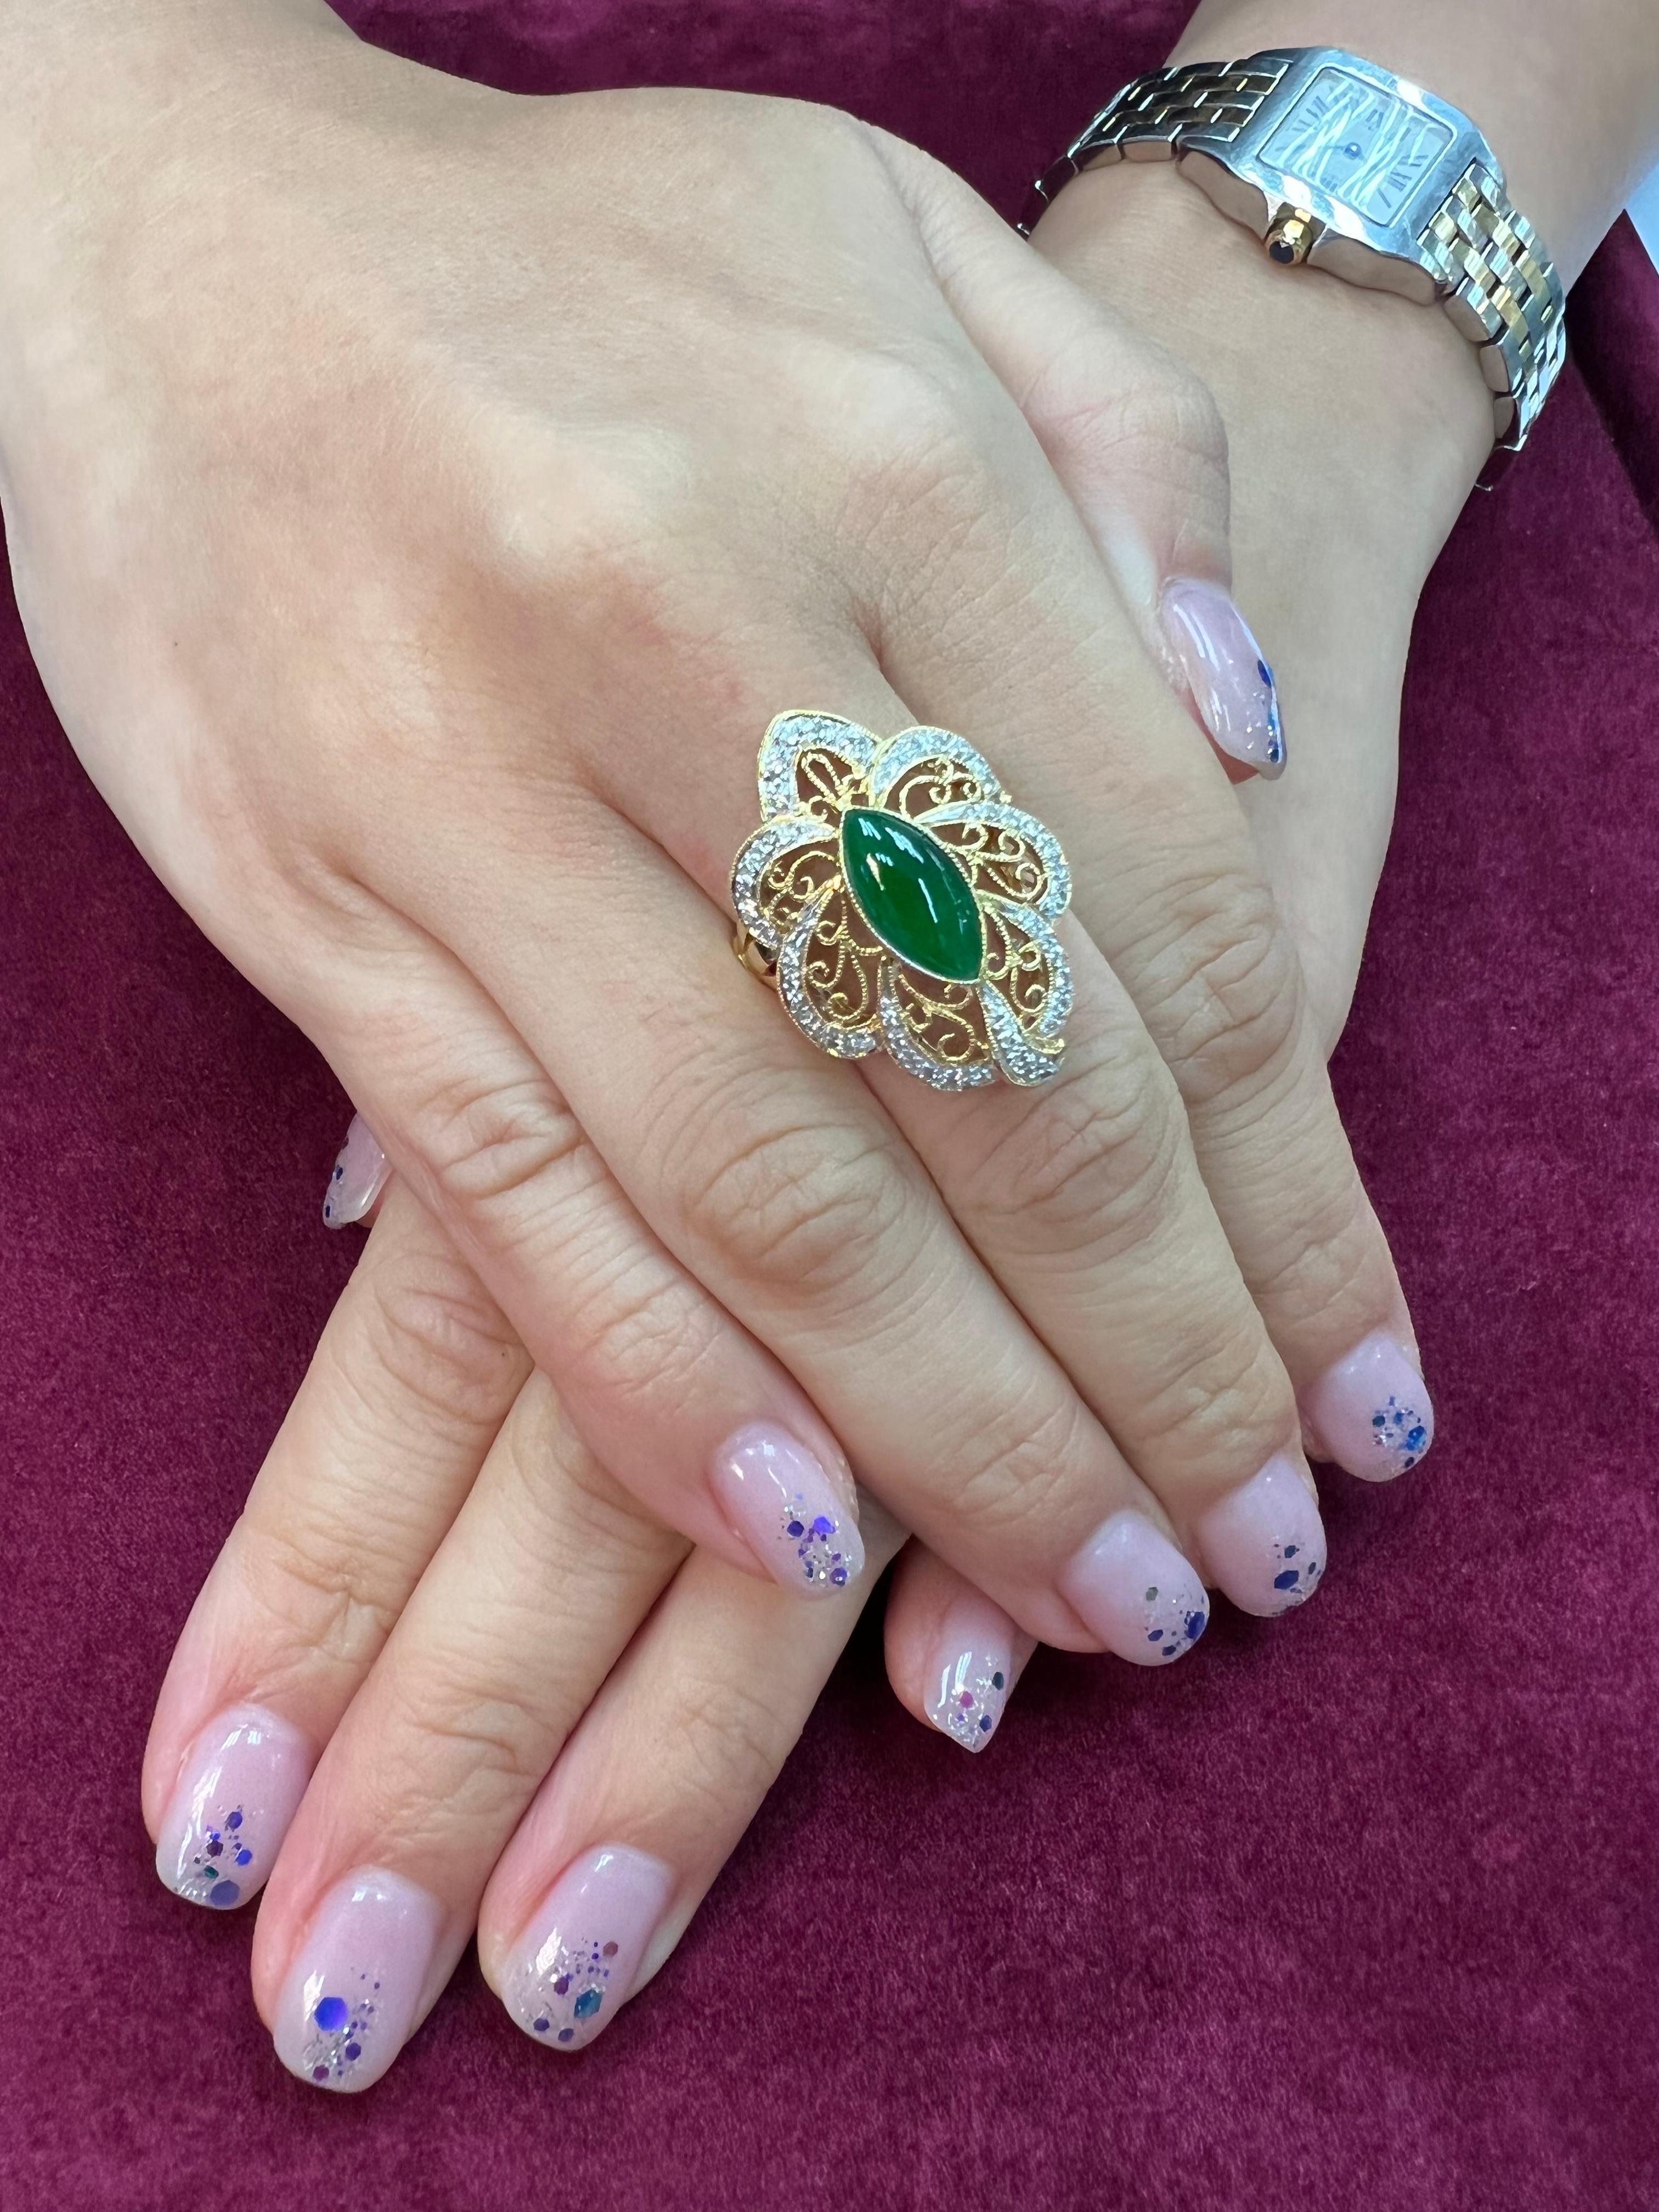 Please check out the HD video. This is an intense apple green Jade and diamond ring. It is certified. The ring is set in 18k yellow gold and diamonds. There are 54 diamonds totaling 0.63cts that surrounds the intense apple jade center stone. The